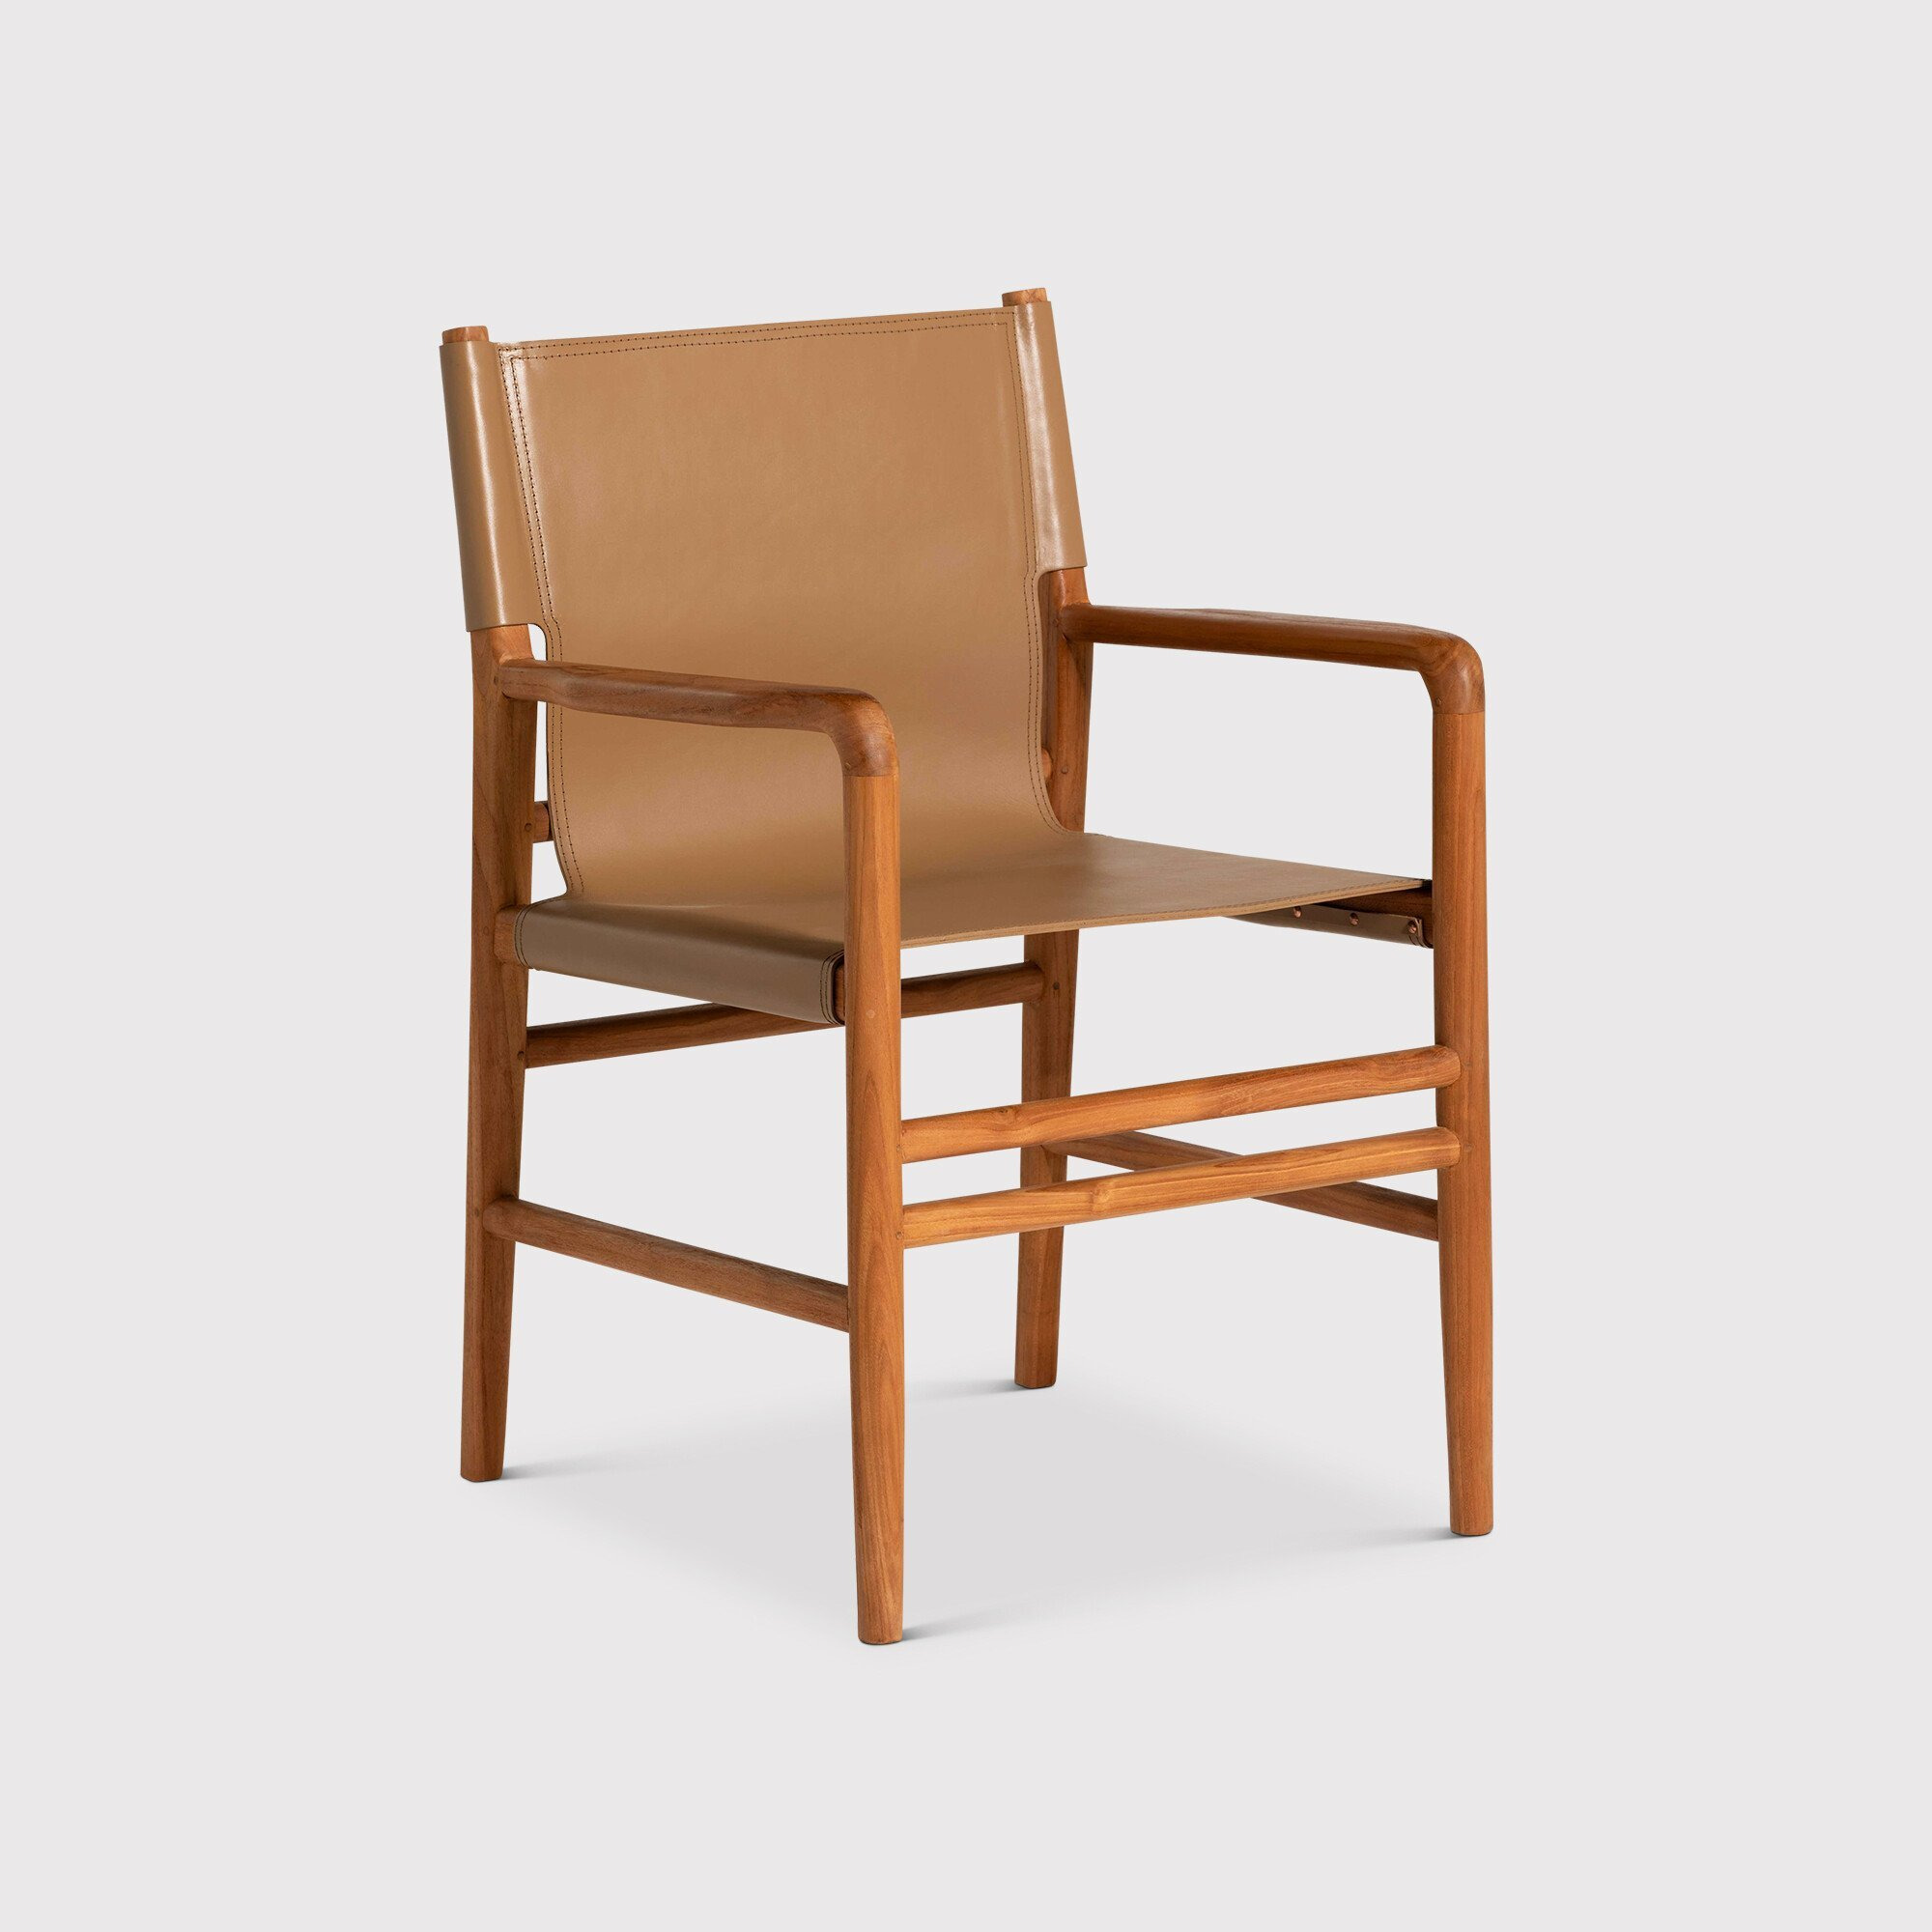 Figaro Dining Chair, Brown Leather - Barker & Stonehouse - image 1